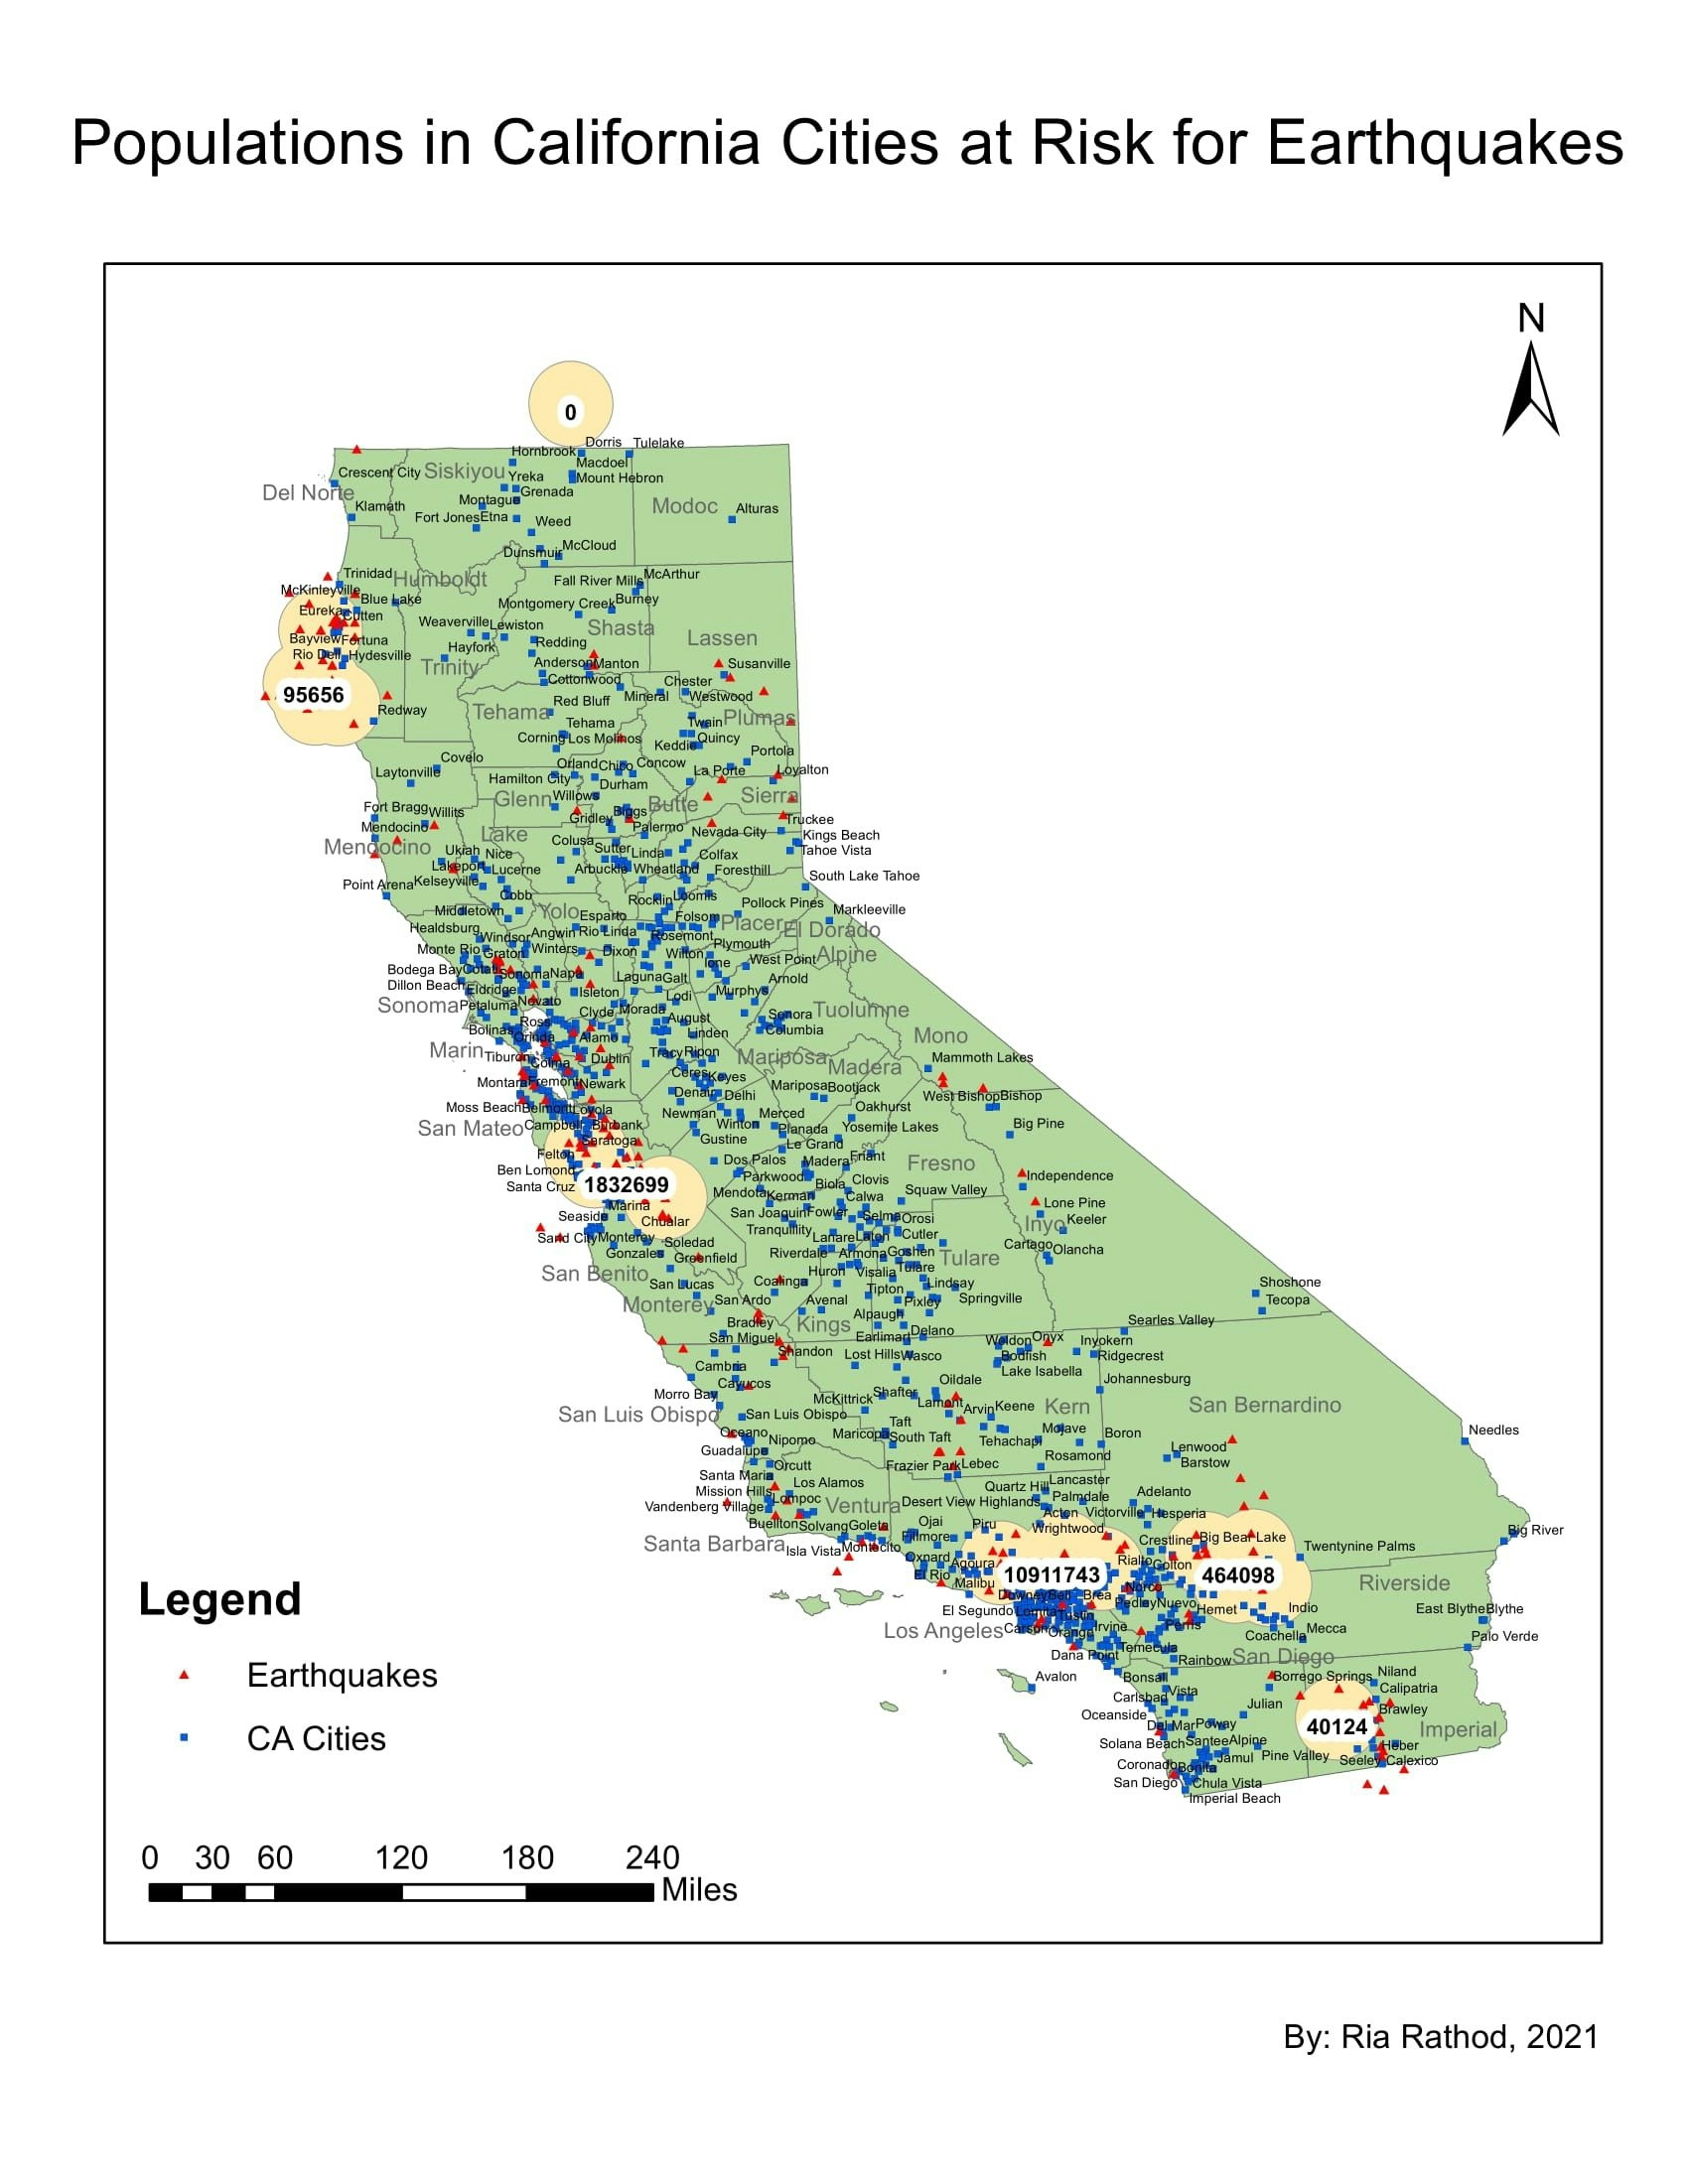 CA Cities at Risk for Earthquakes